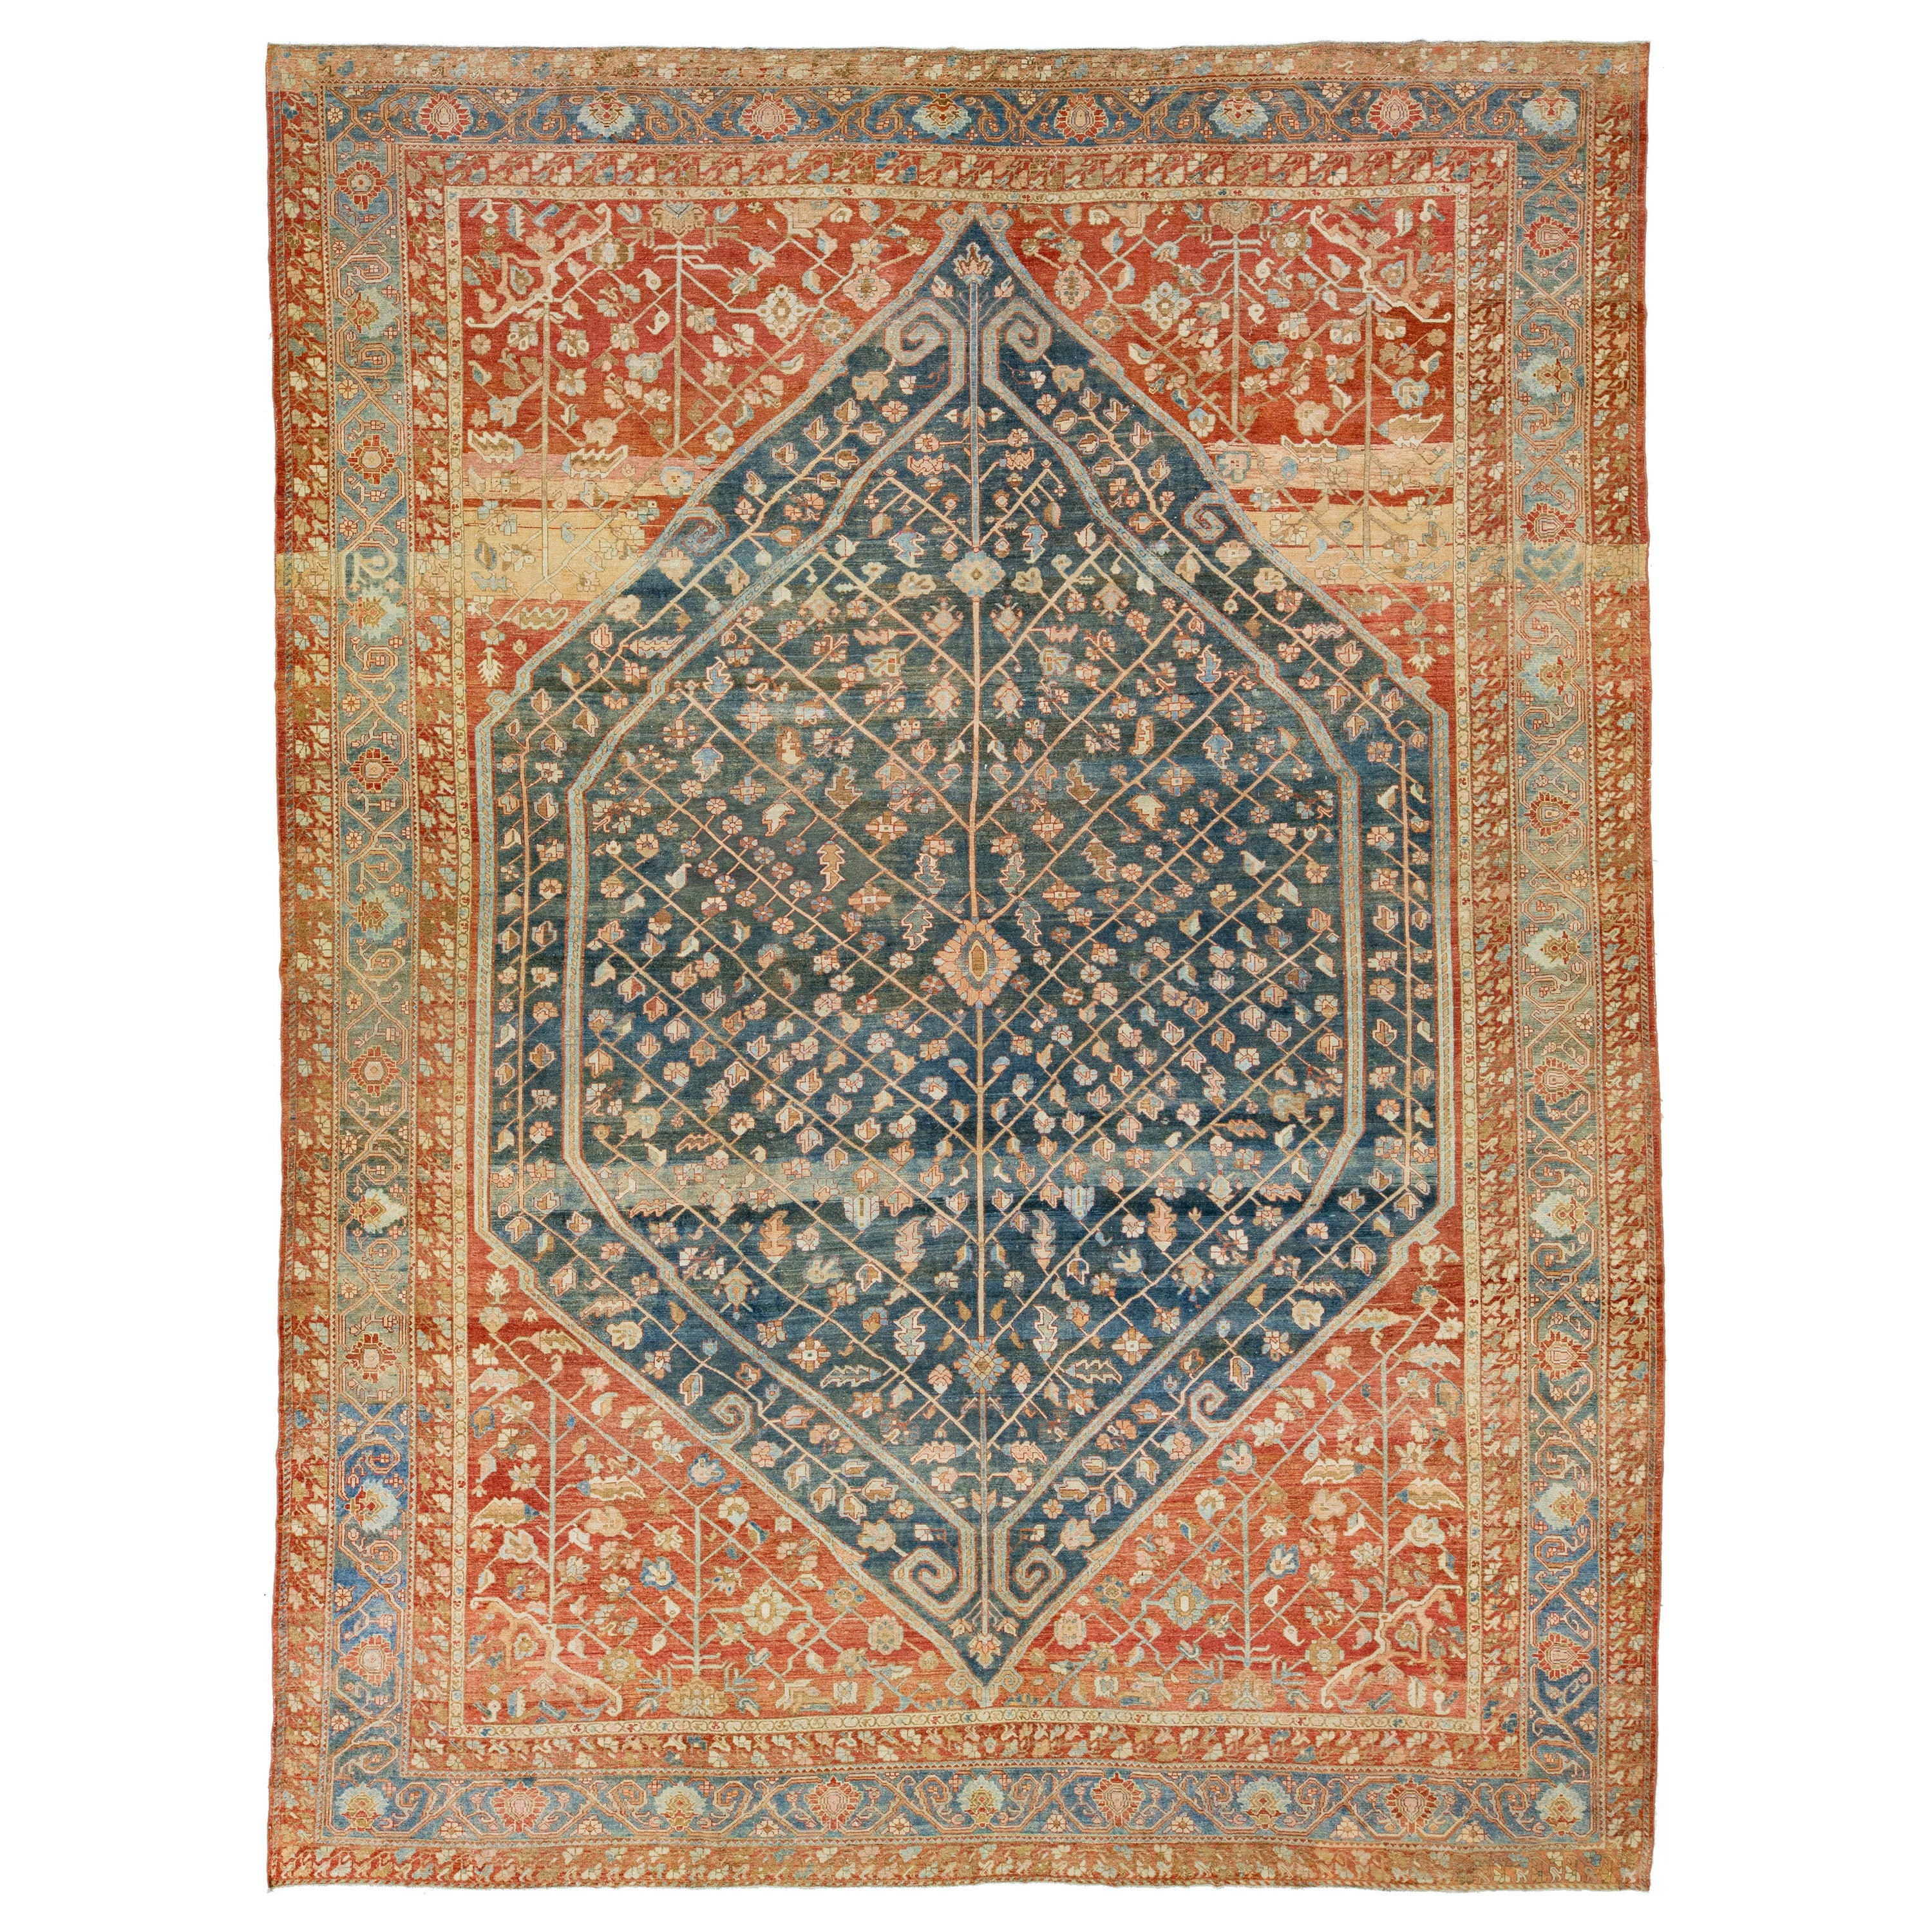 Allover 1920s Antique Persian Bakhtiari Wool Rug In Blue & Red-Rust Color 